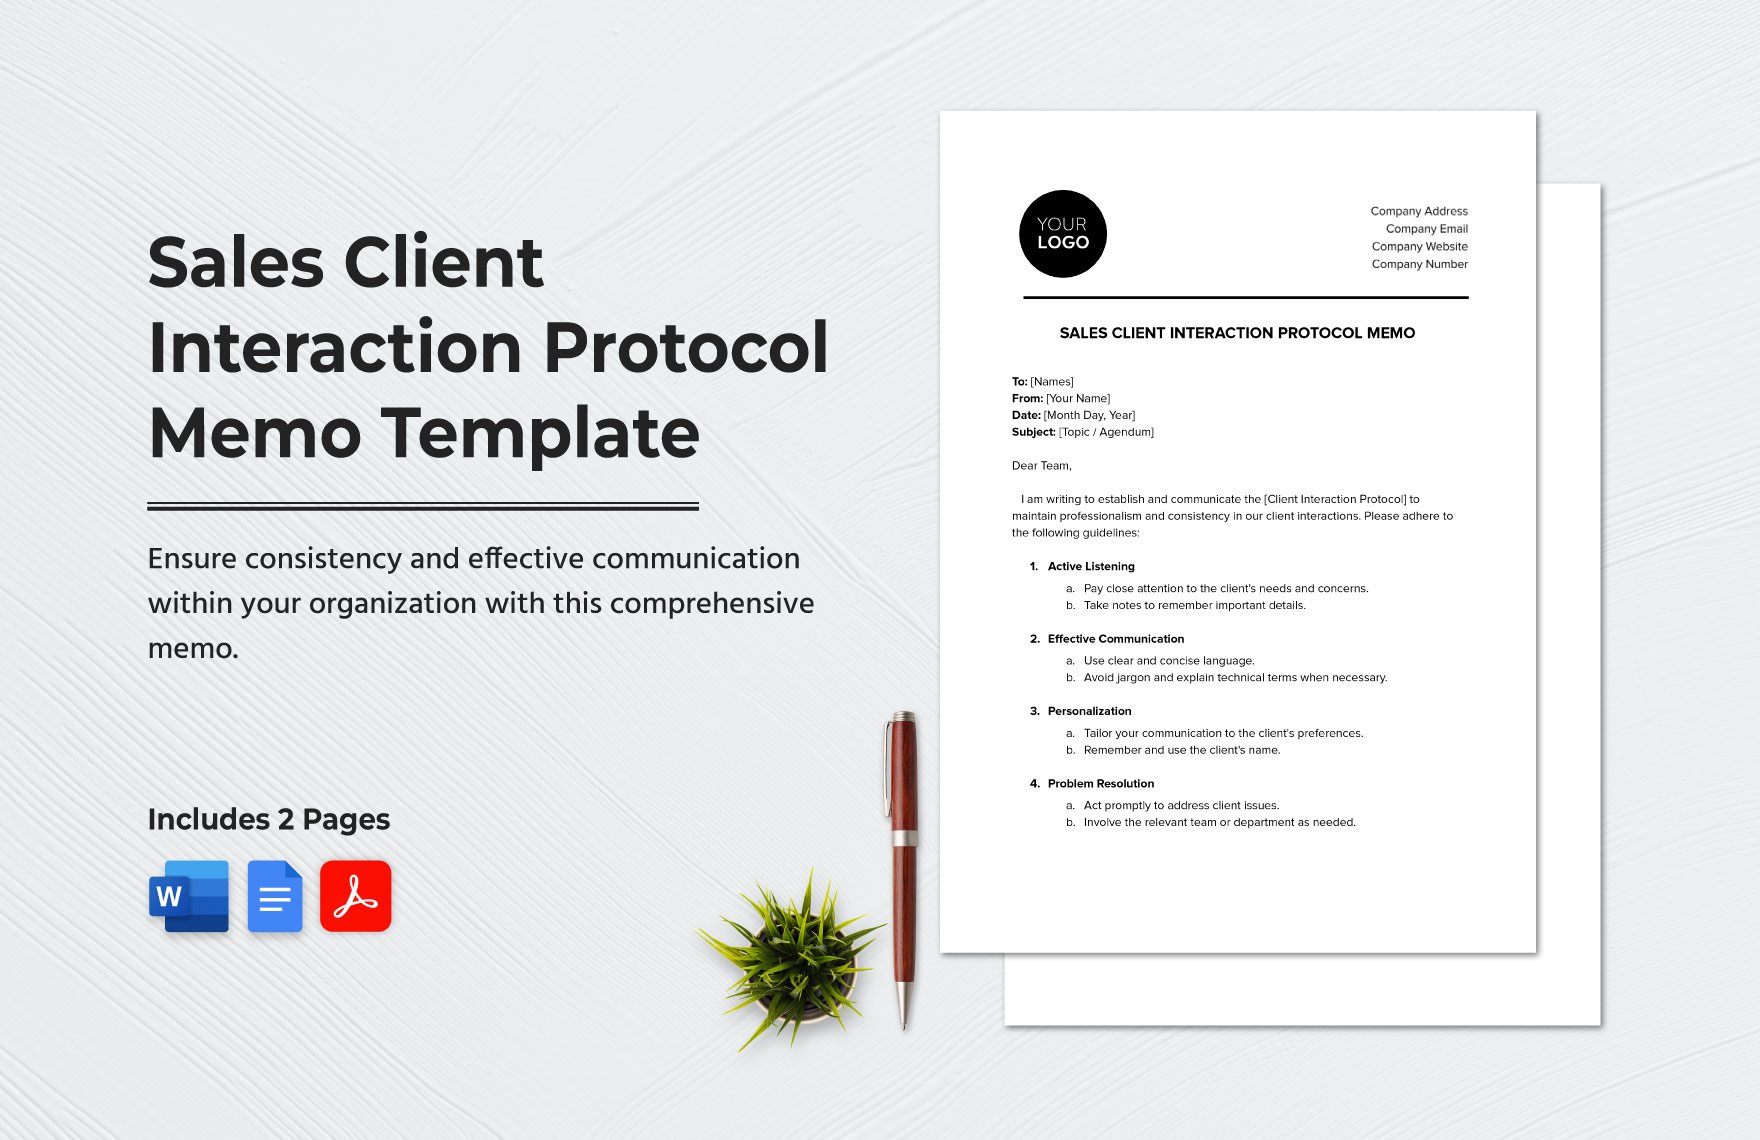 Sales Client Interaction Protocol Memo Template